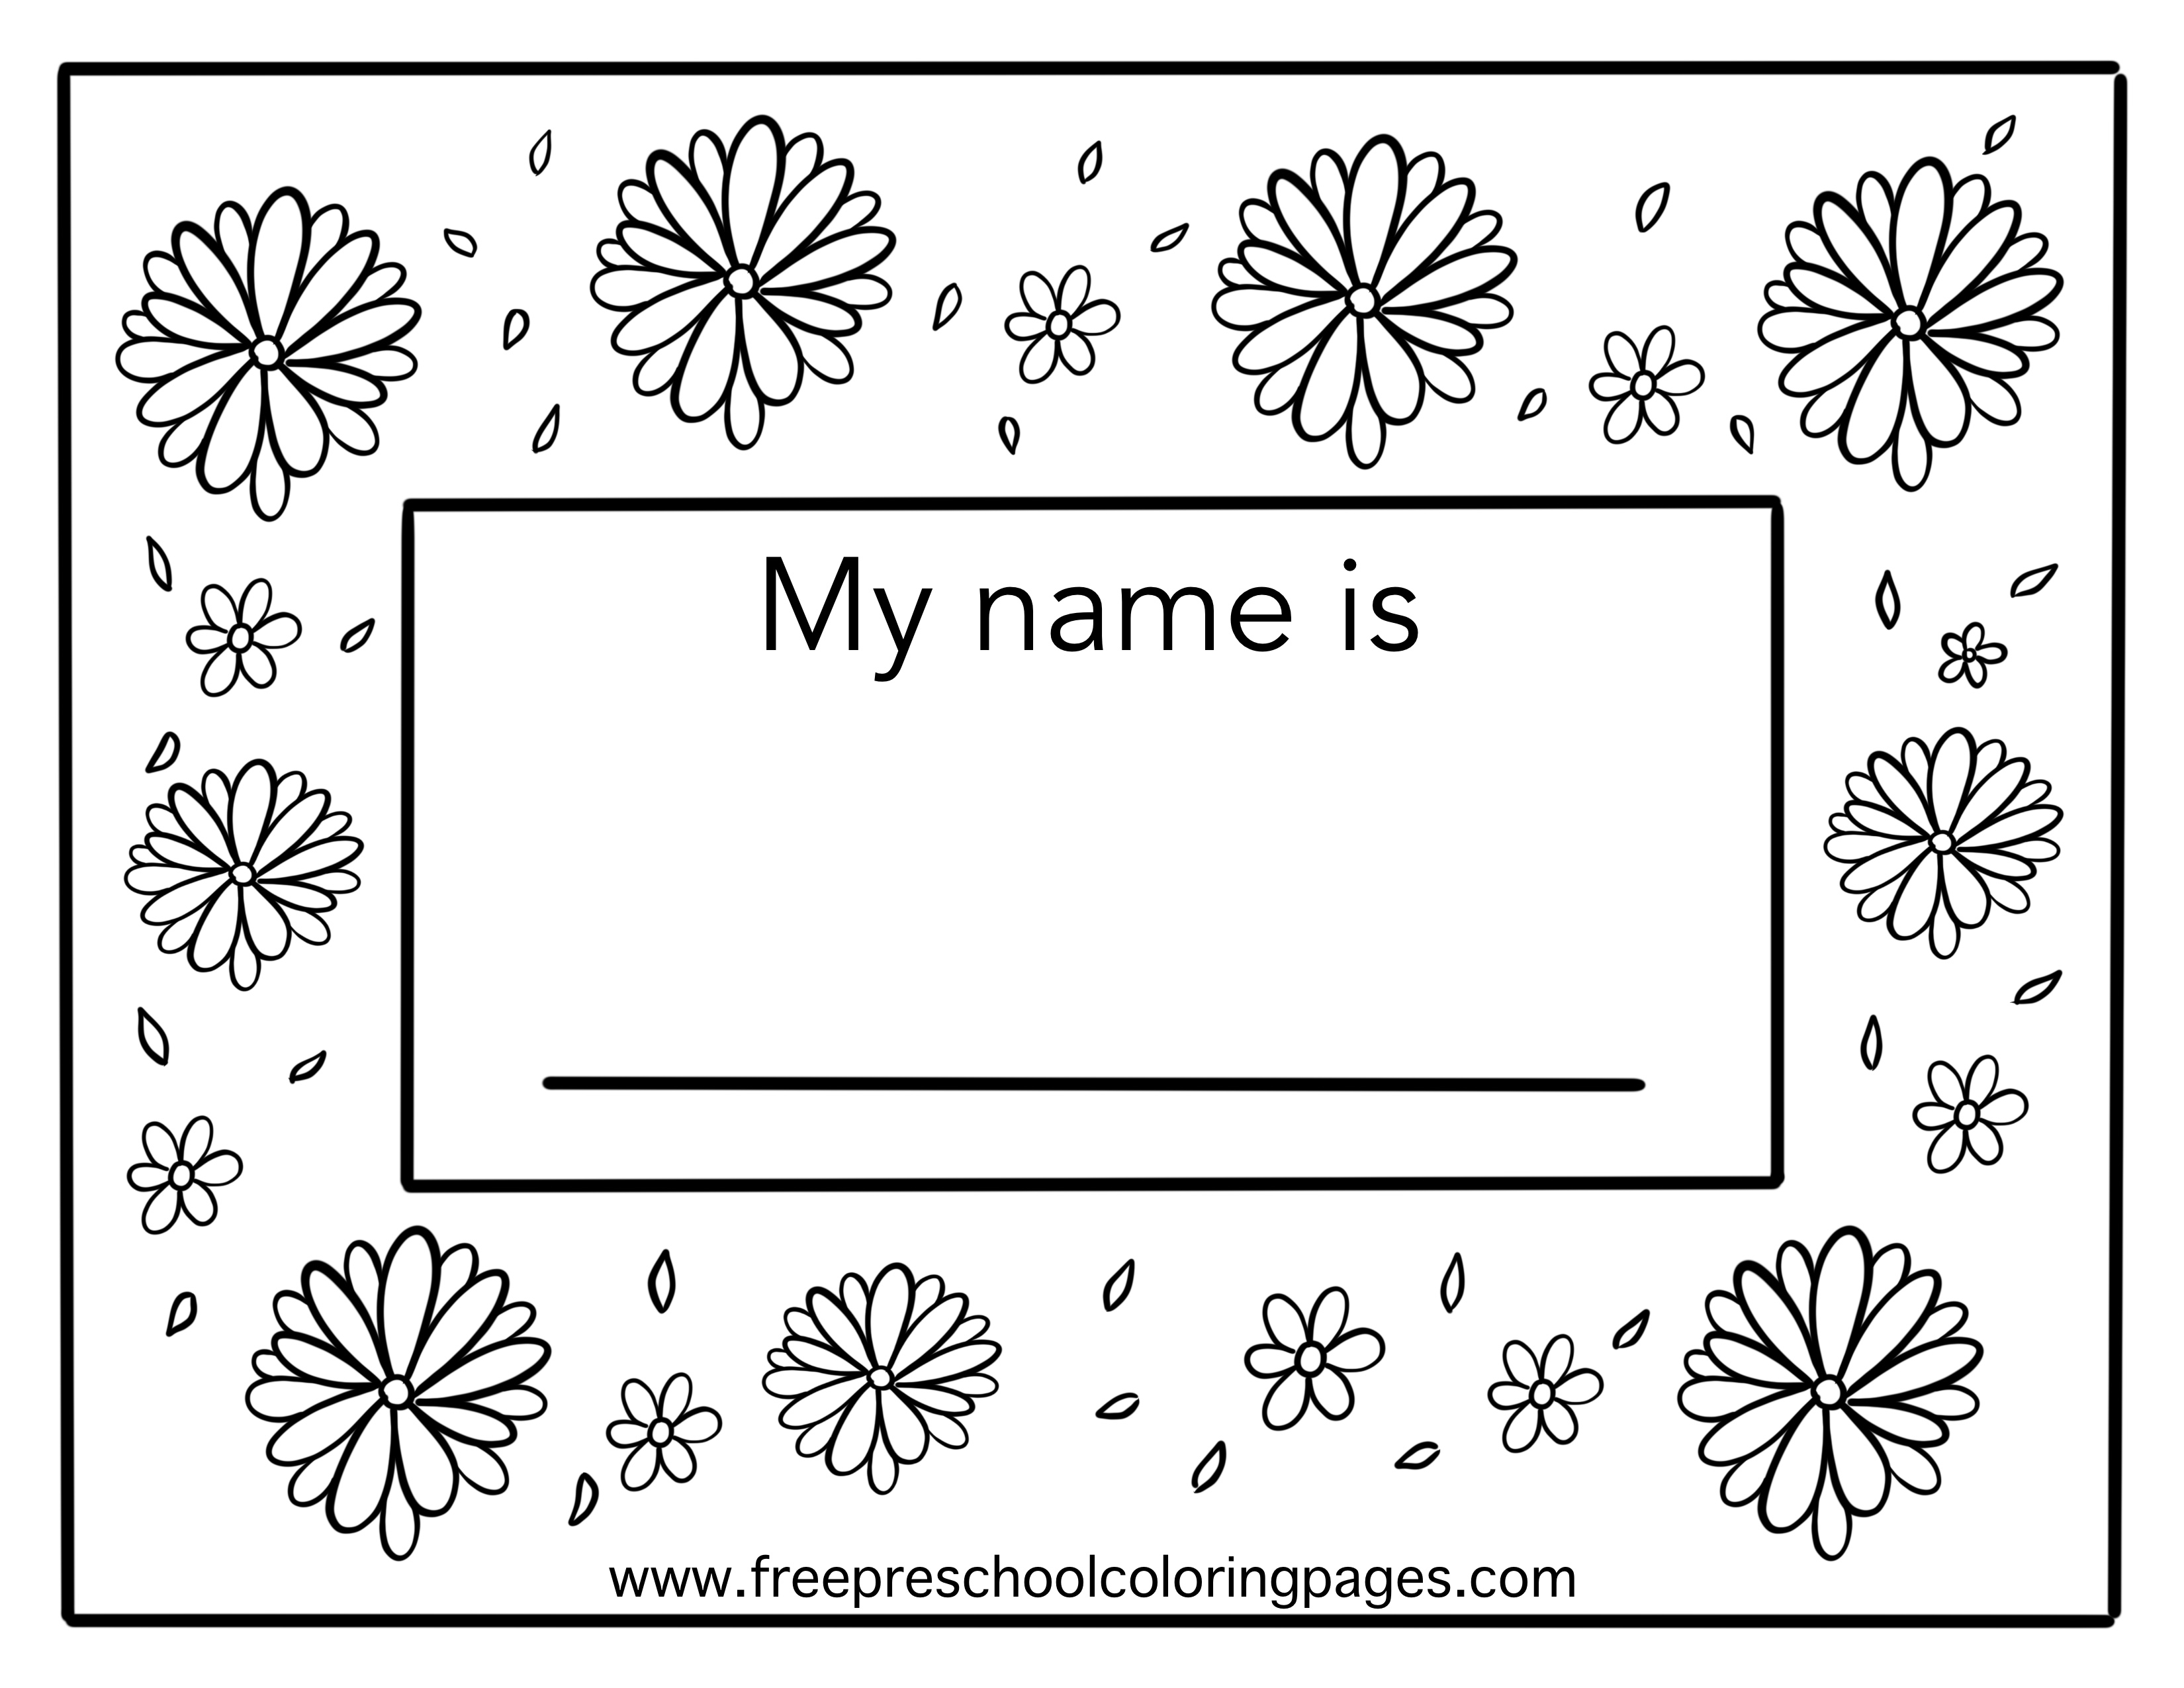 Name coloring pages